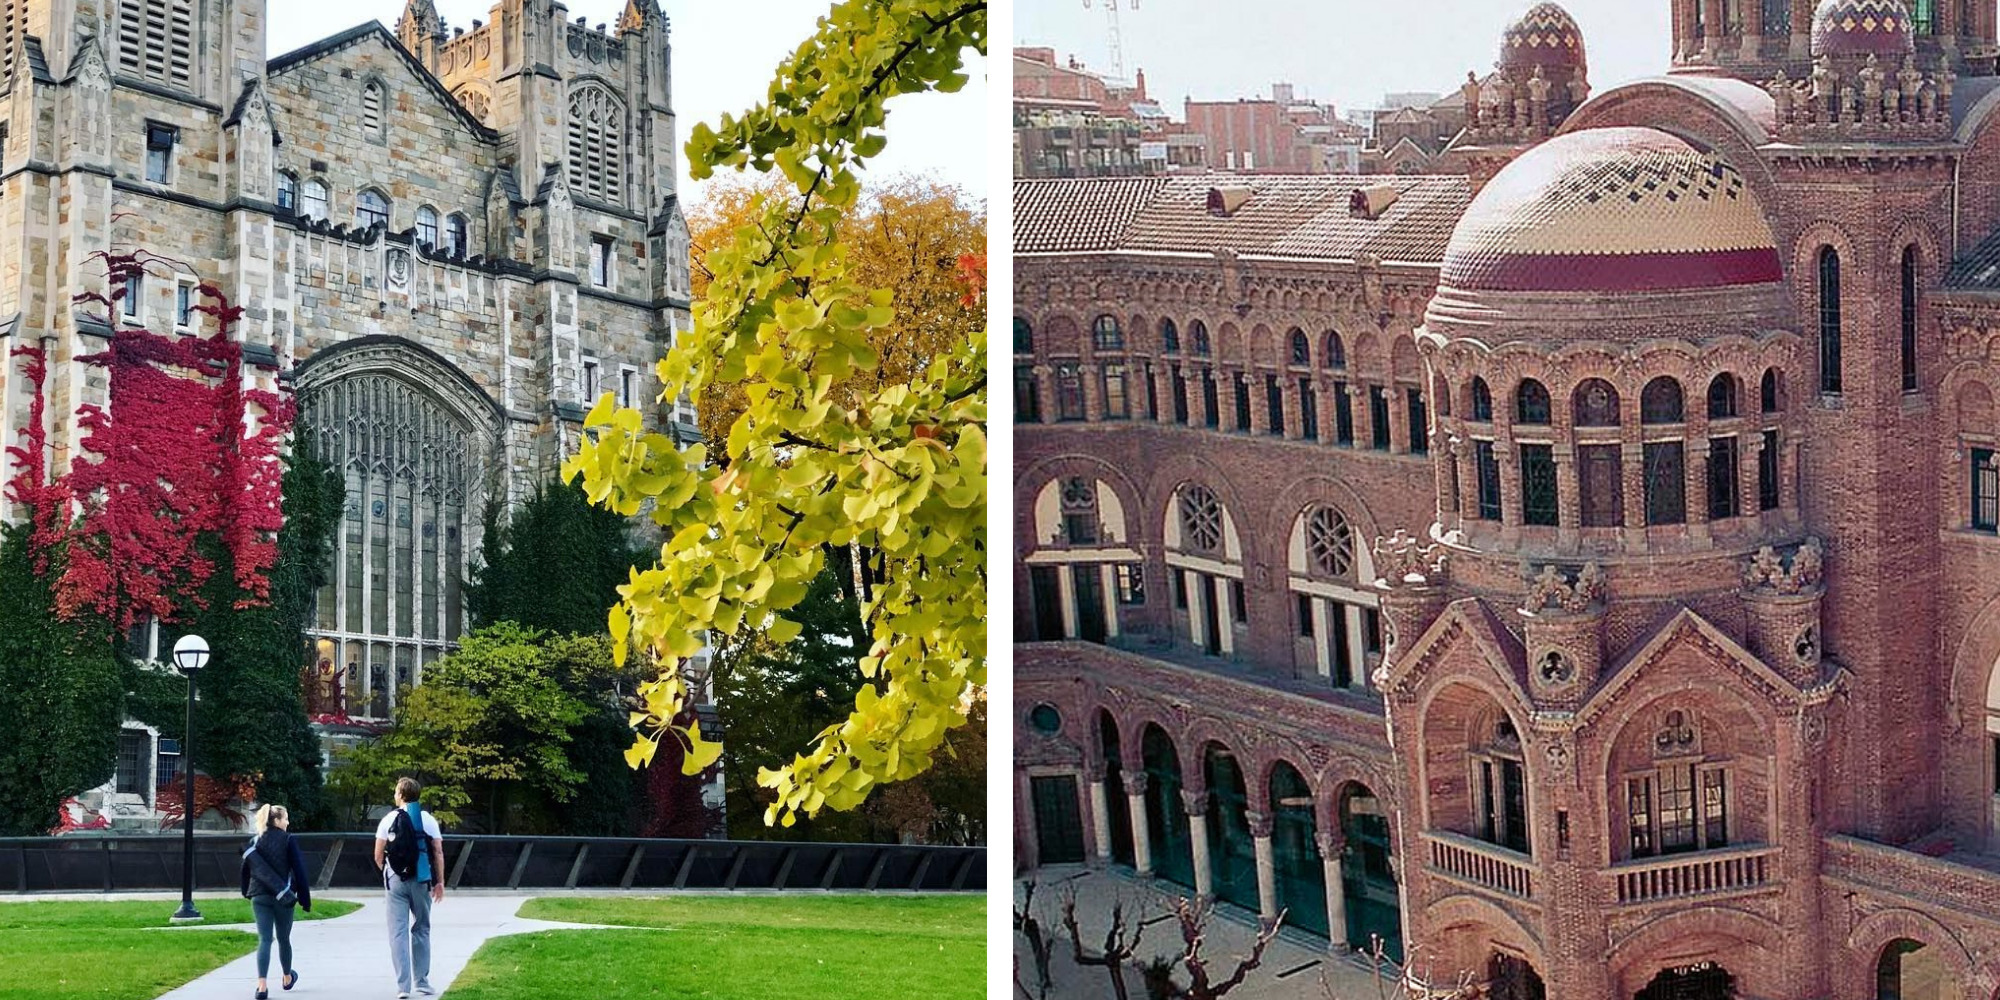 3 Differences Between My Home University & My Barcelona University